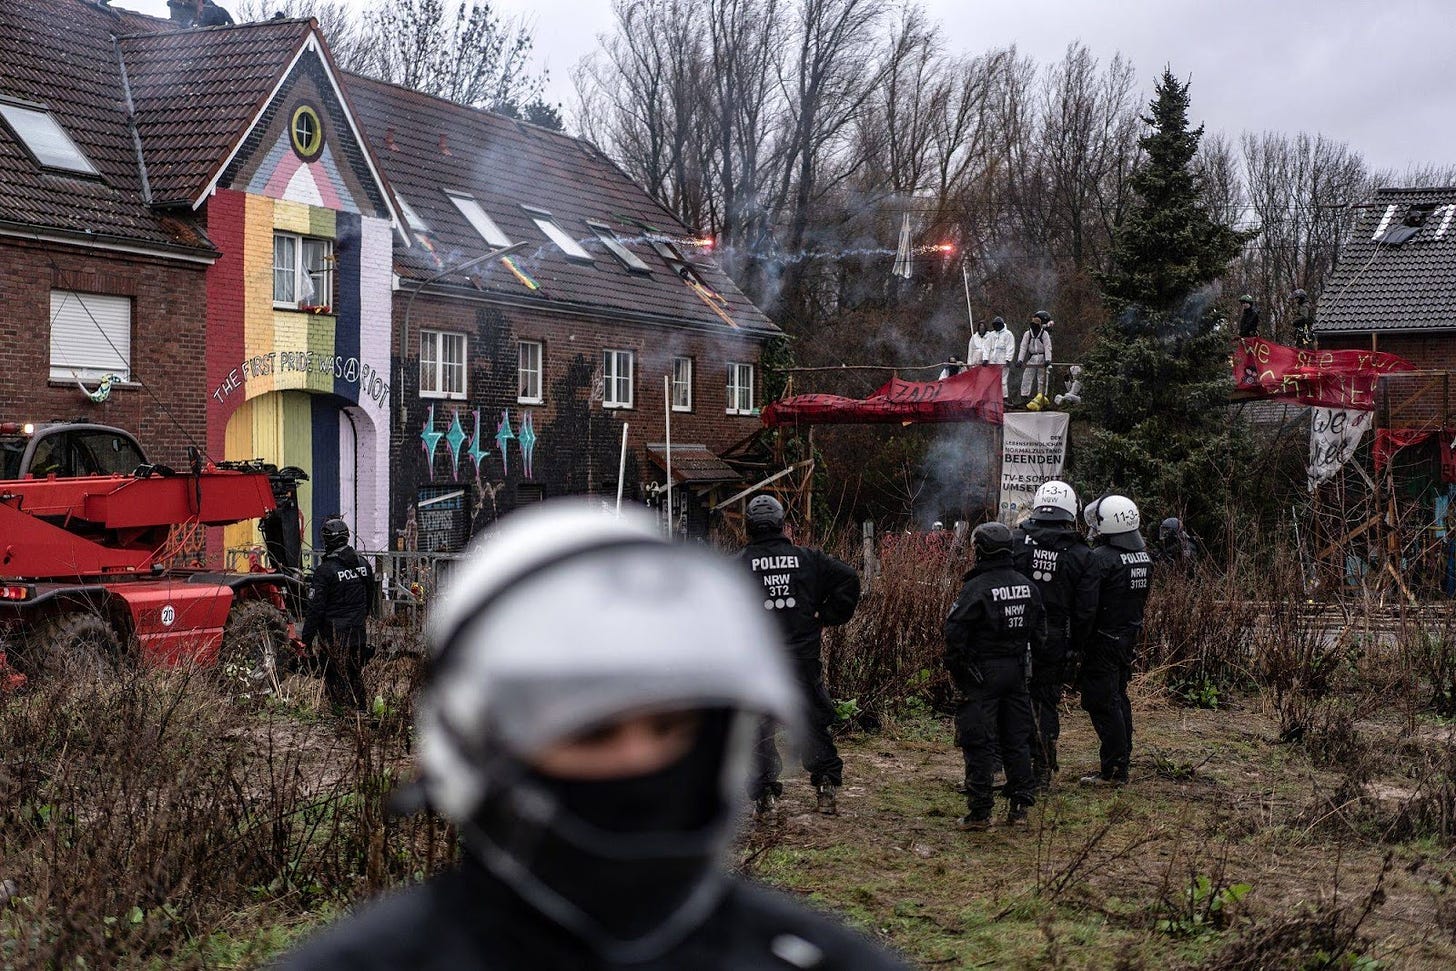 Police prepare to enter buildings to remove environmental activists in the village of Luetzerath, on Thursday. | BLOOMBERG